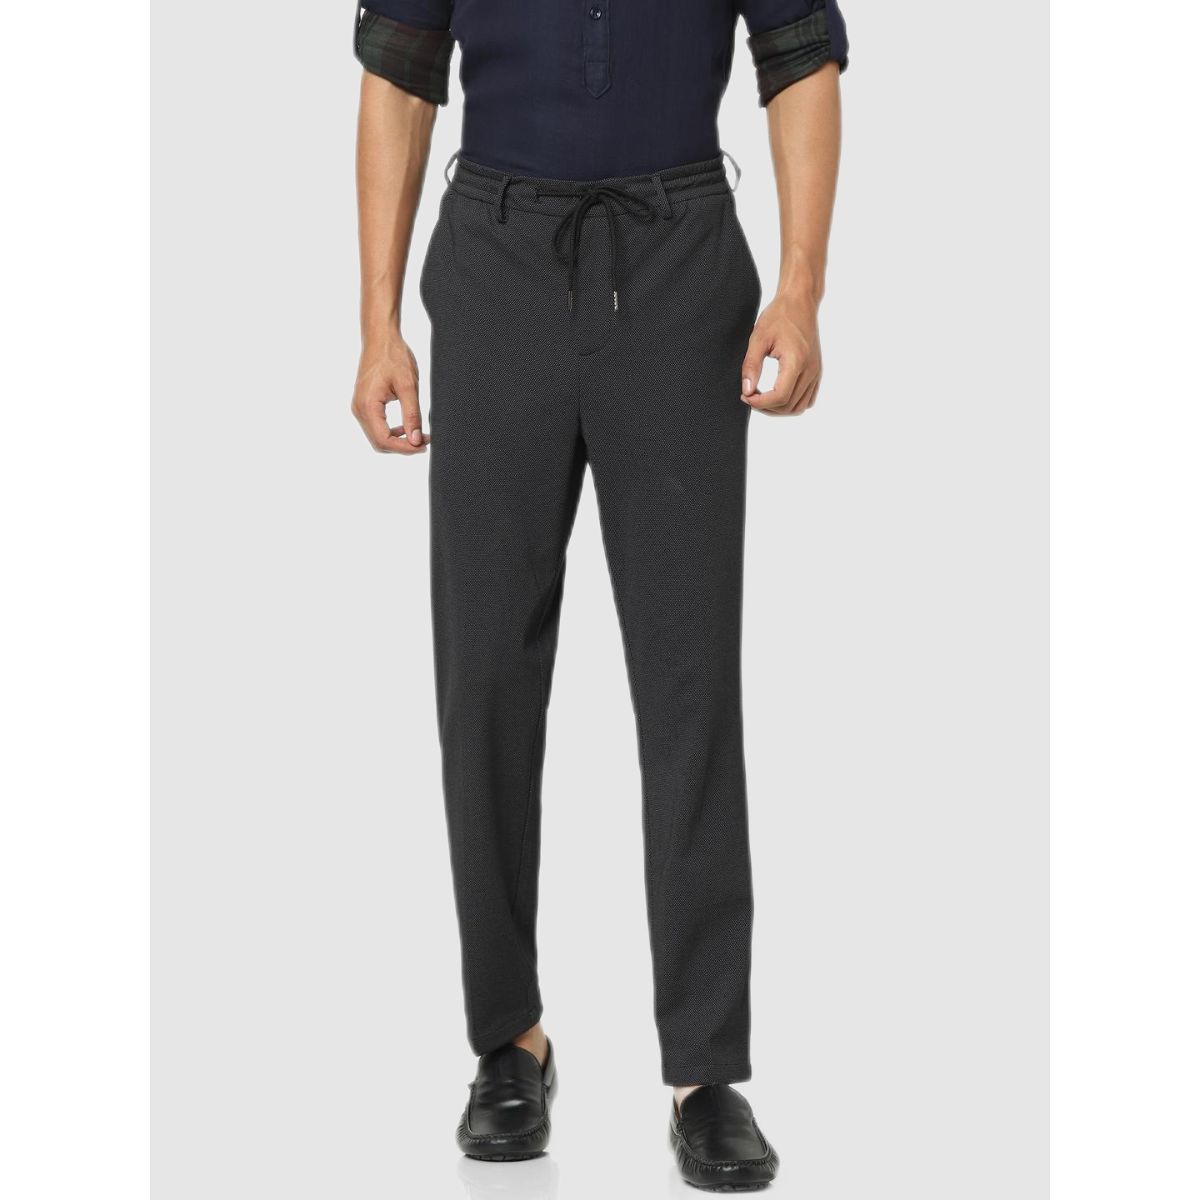 Buy Celio Relaxed fit Pants & Jeans online - 2 products | FASHIOLA.in